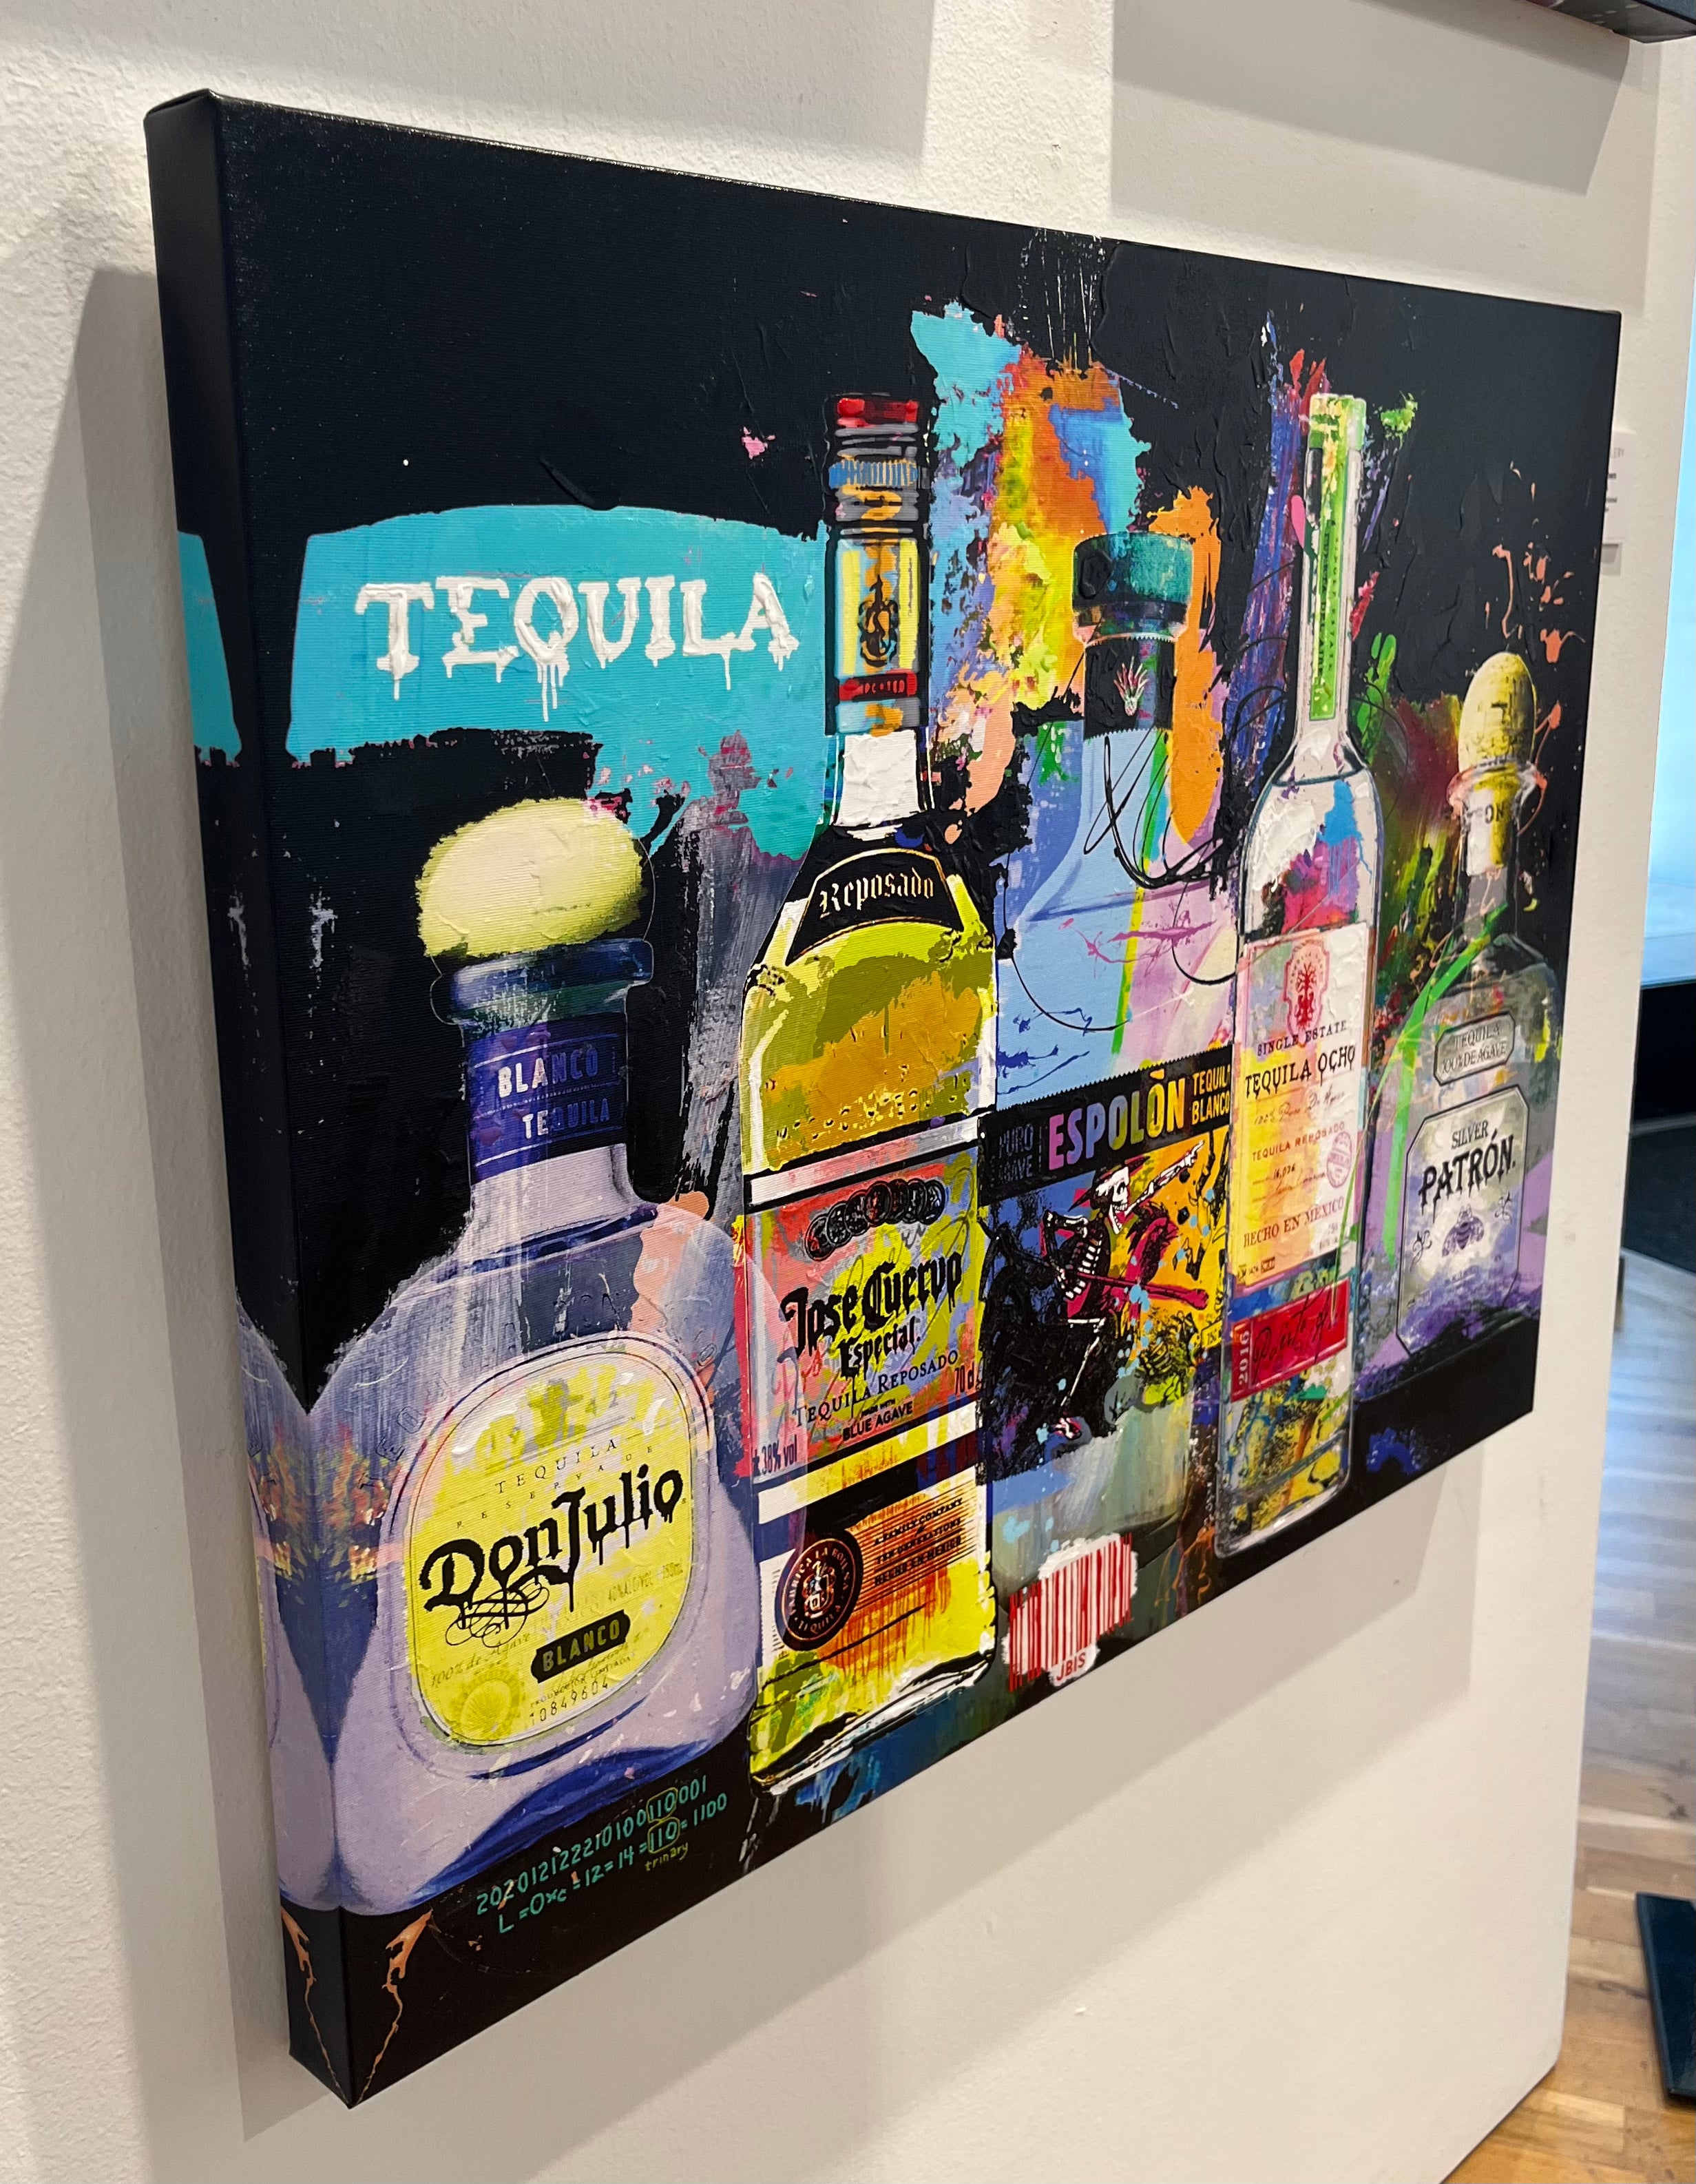 Bisaillon Brothers artwork of  Tequila featuring Patron, Tequila Ocho, Espolon, Jose Cuervo and Don Julio.